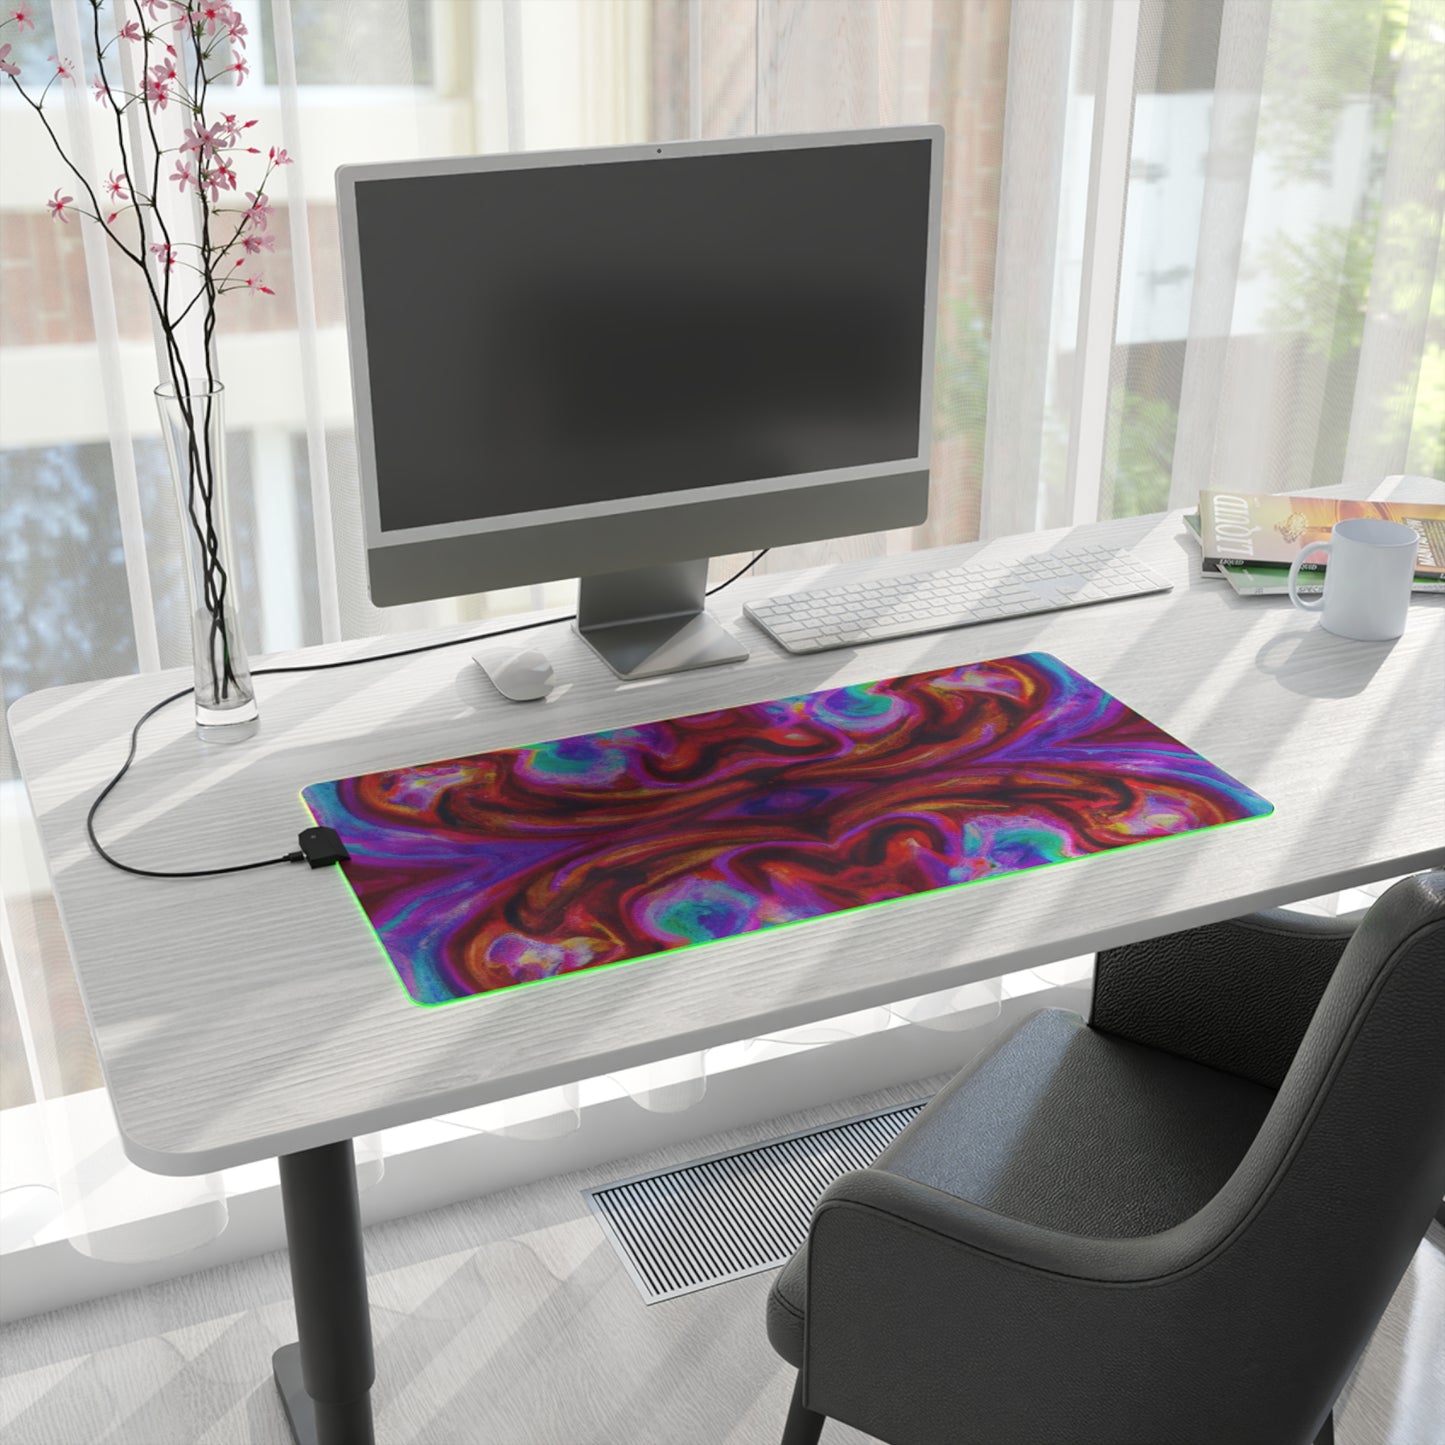 Turbo Texan - Psychedelic Trippy LED Light Up Gaming Mouse Pad